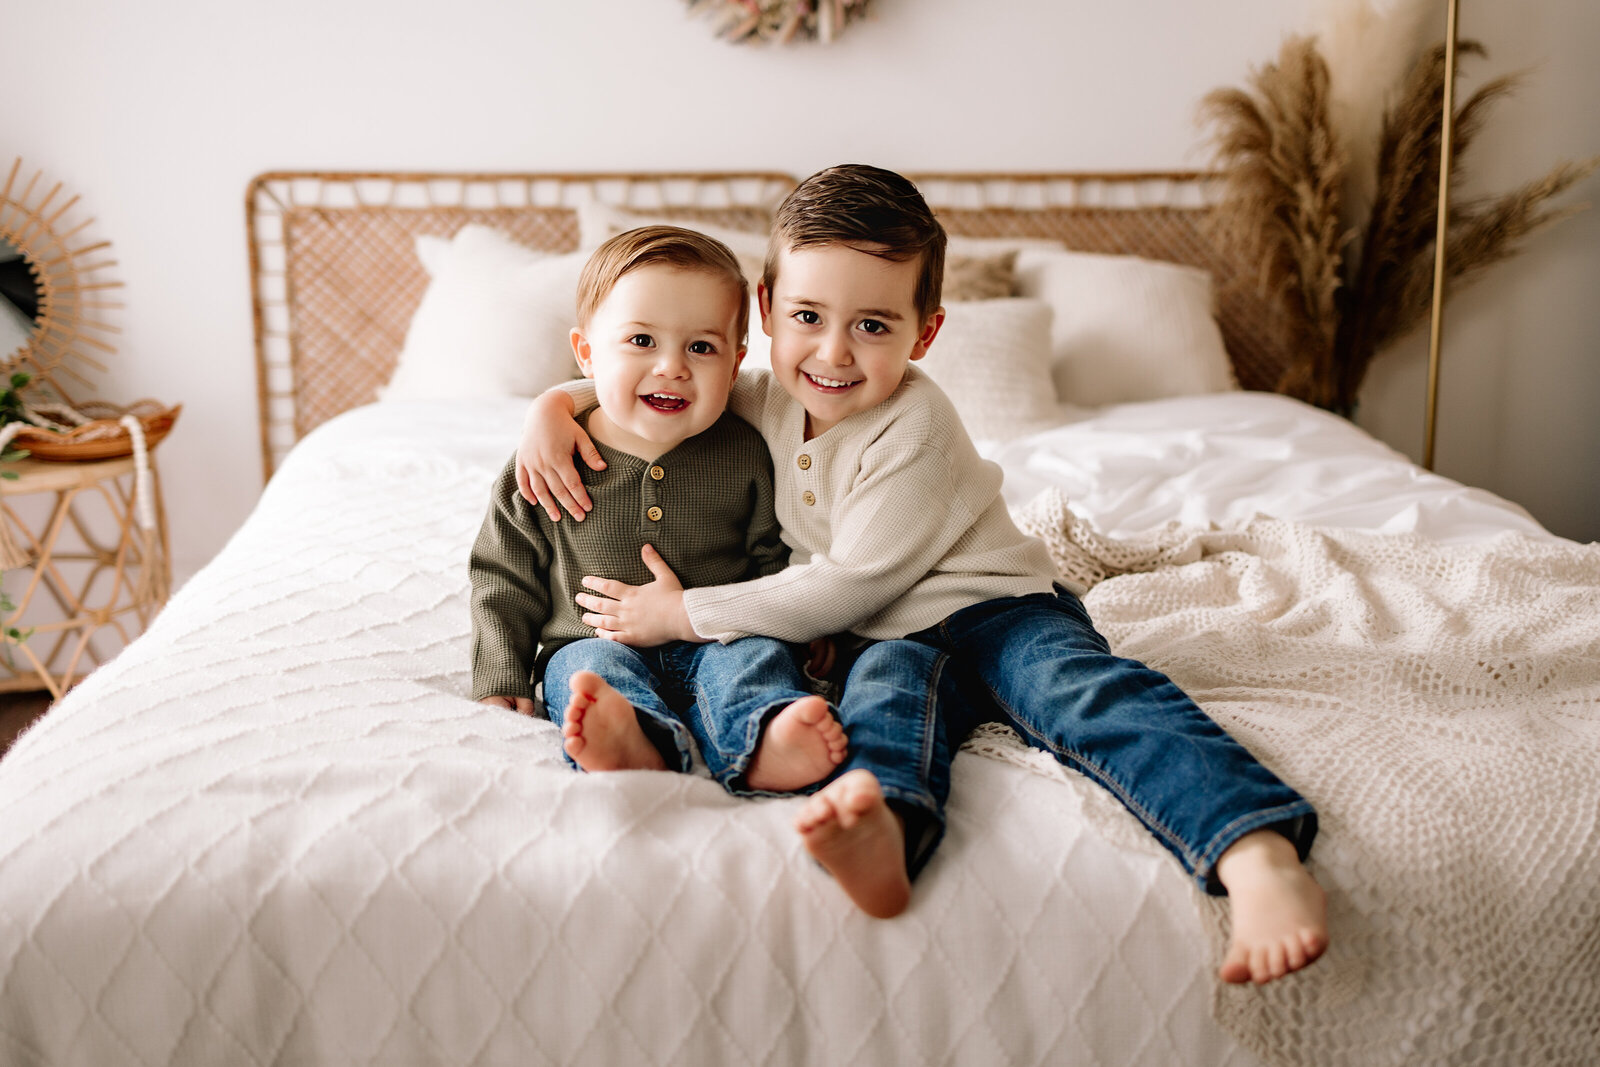 Two little boys snuggle up together on a bed with boho decor